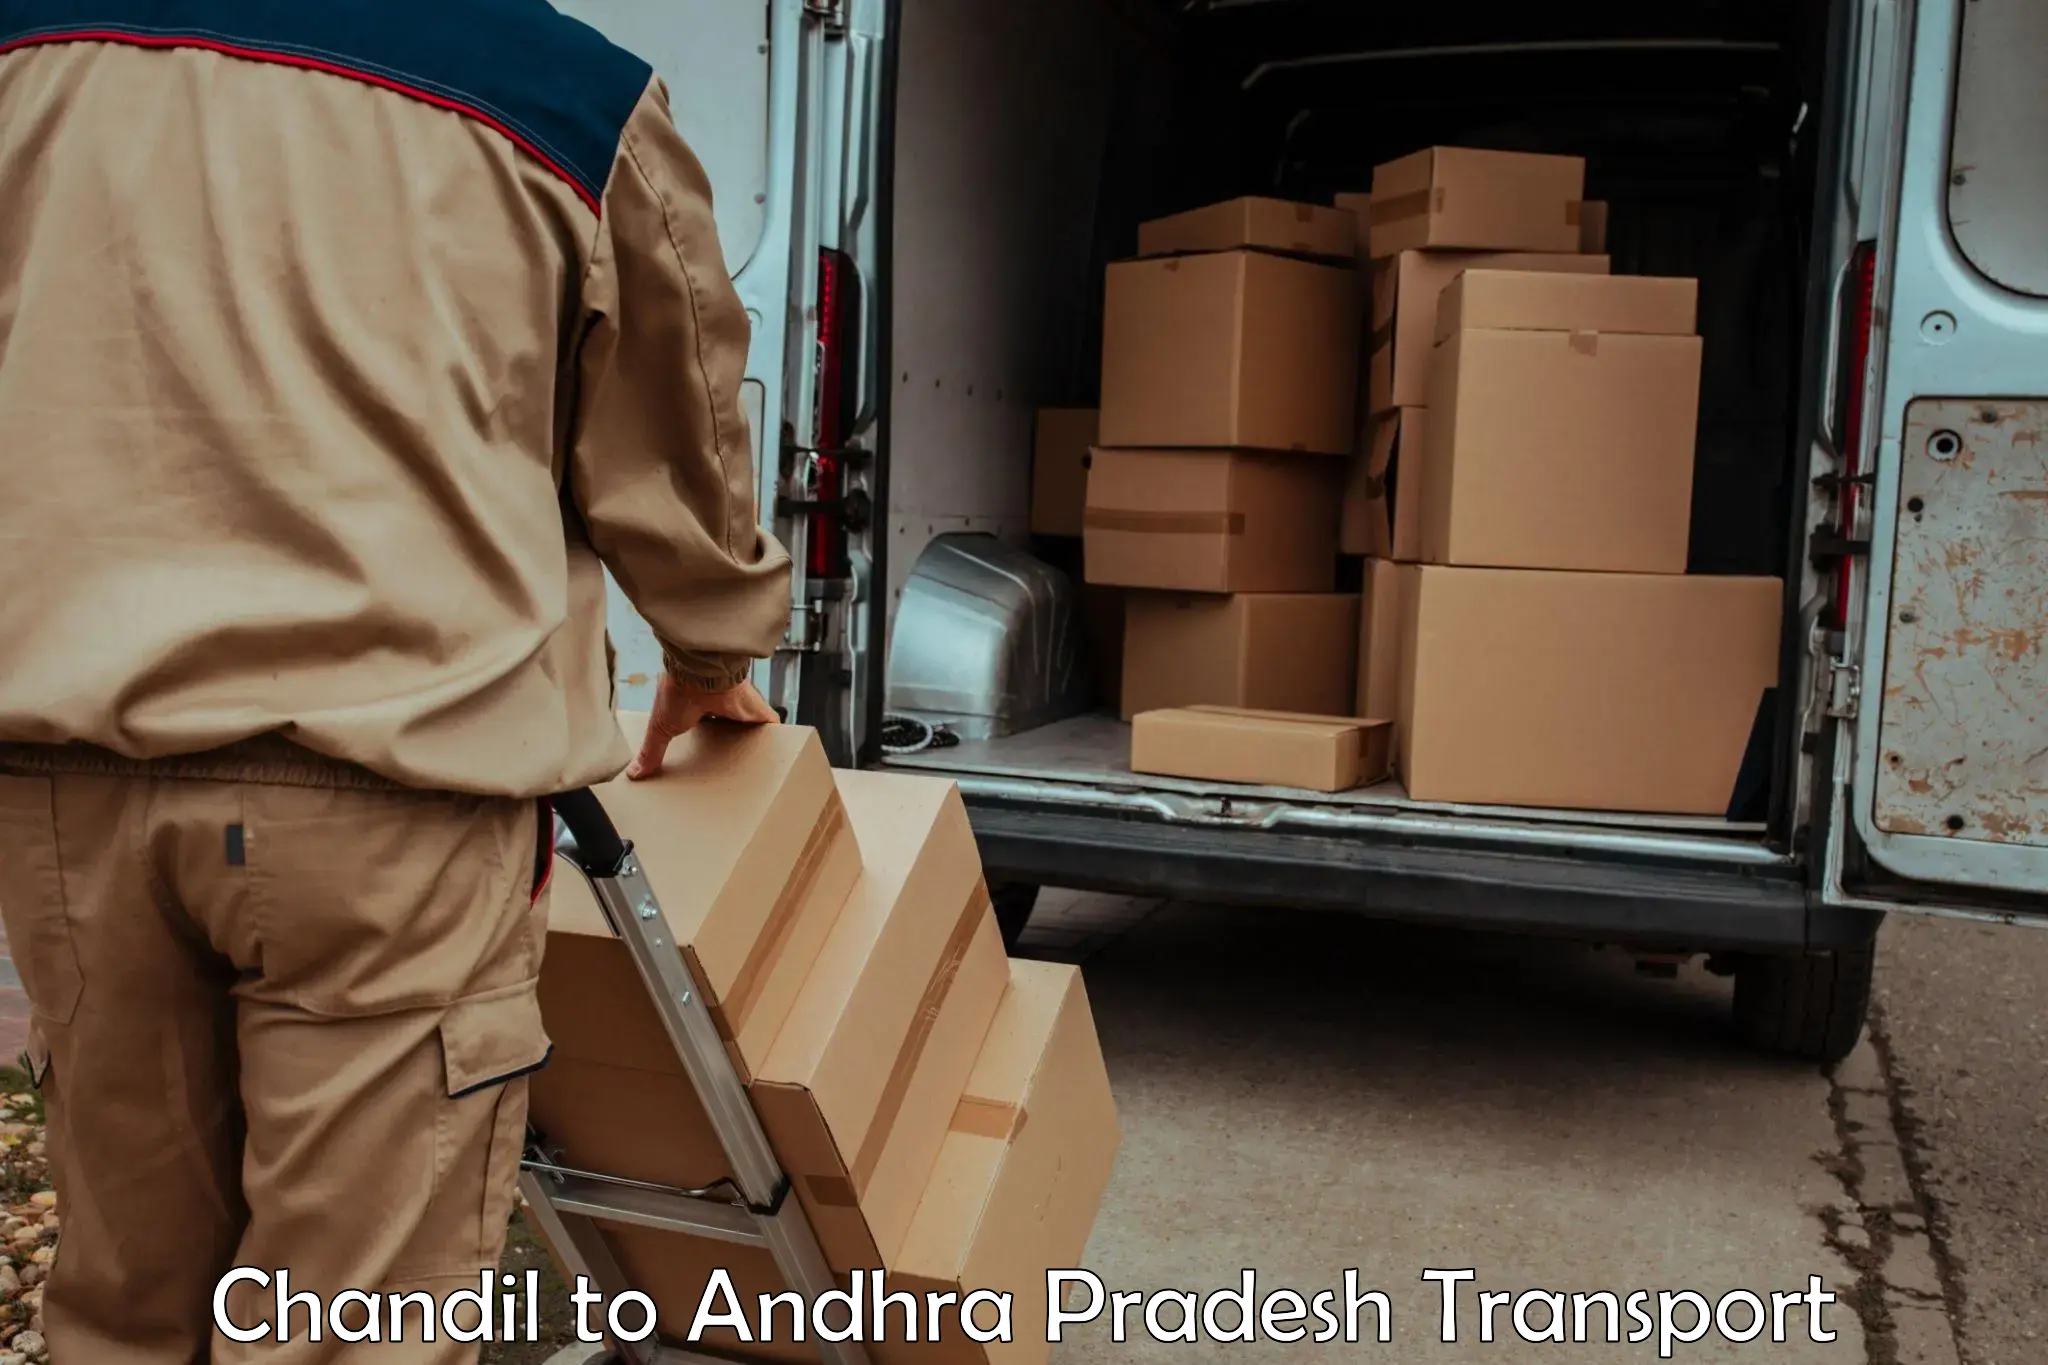 Part load transport service in India Chandil to Vempalli